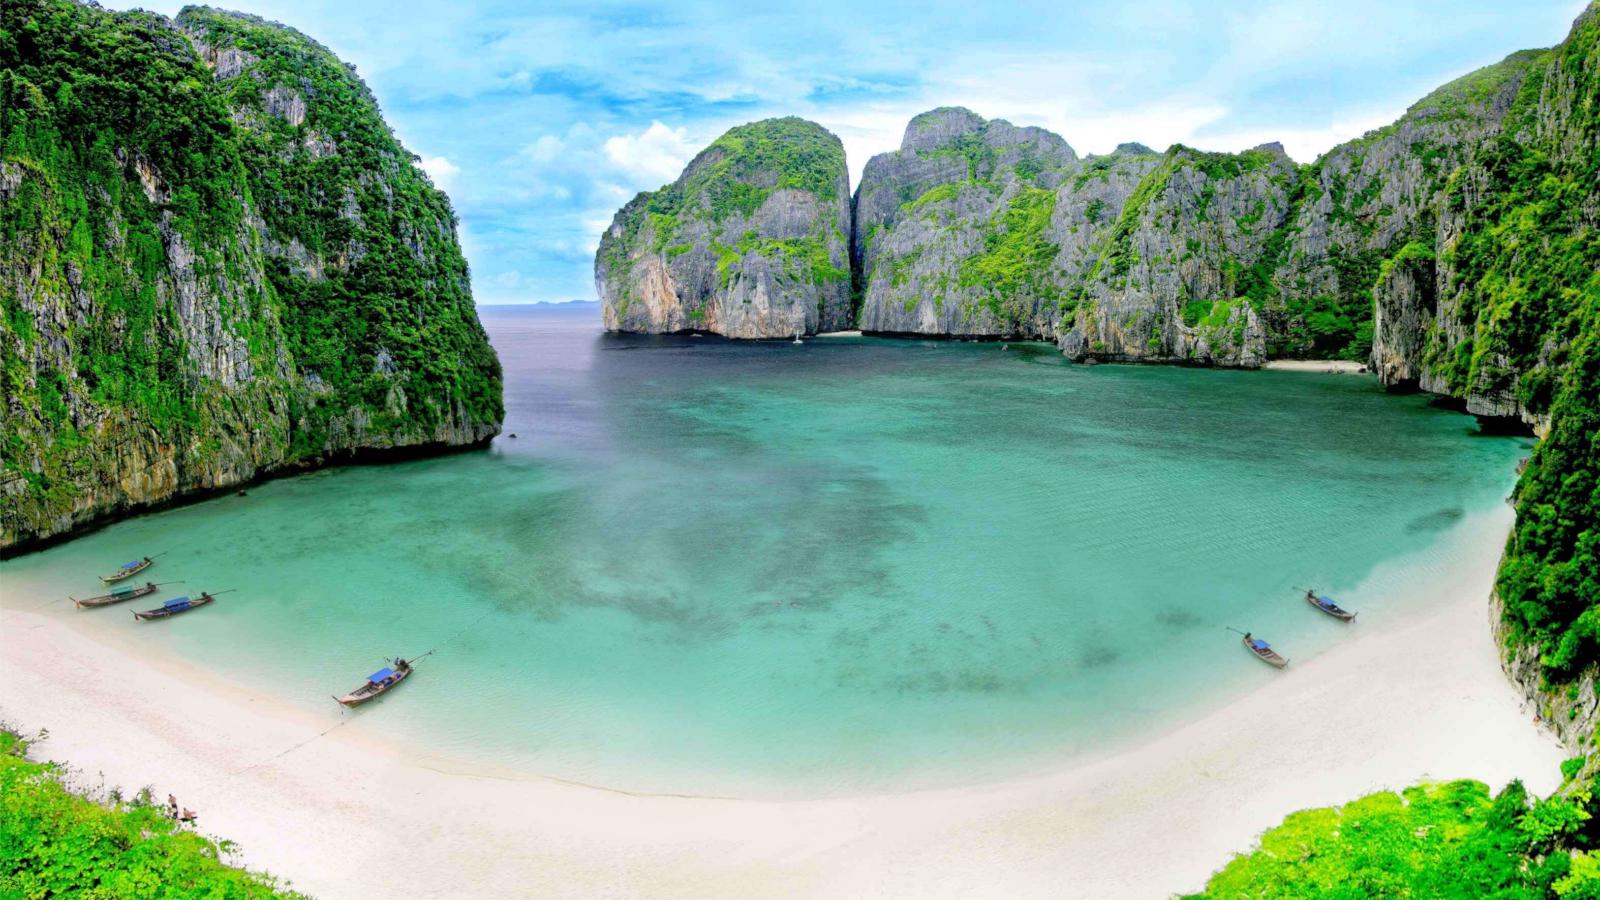 Maya Bay – The Most Famous Beach in Thailand